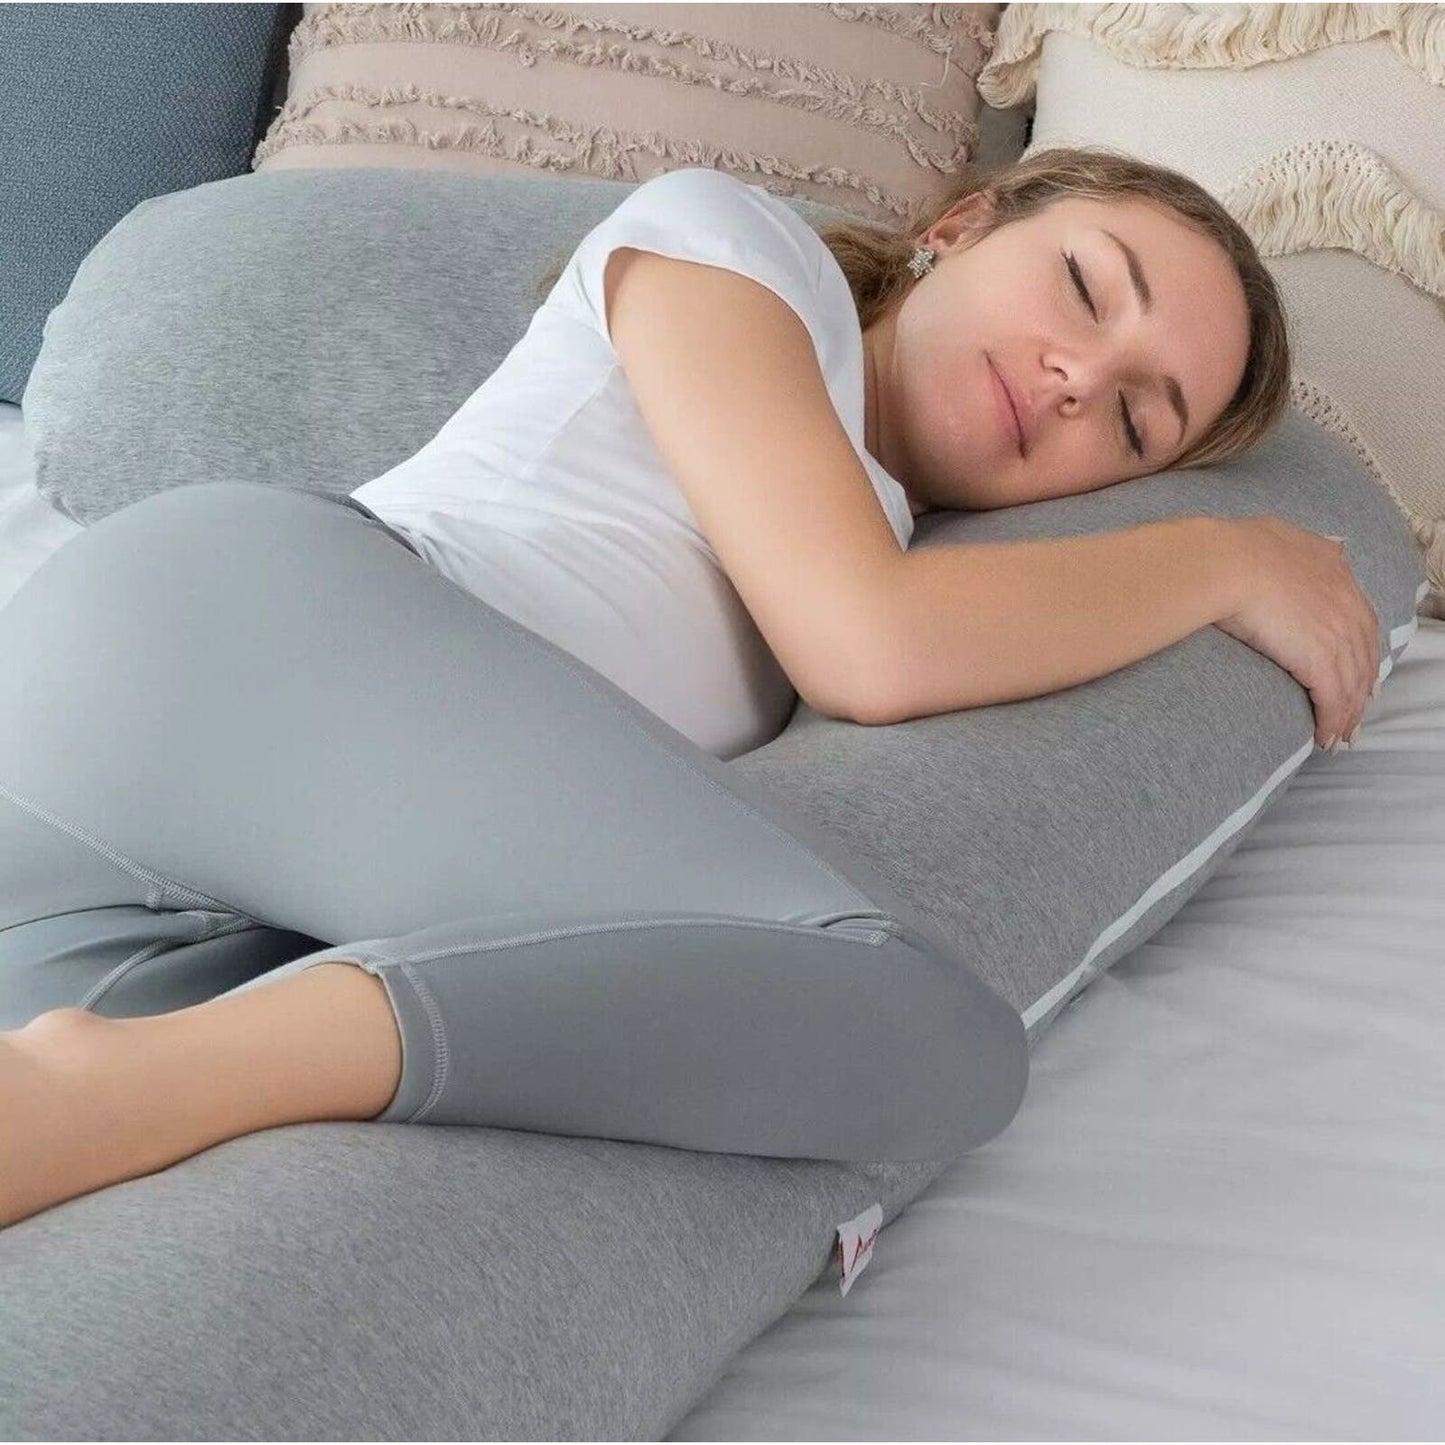 Pregnancy Pillow with Jersey Cover, L Shaped Full Grey - AngQi